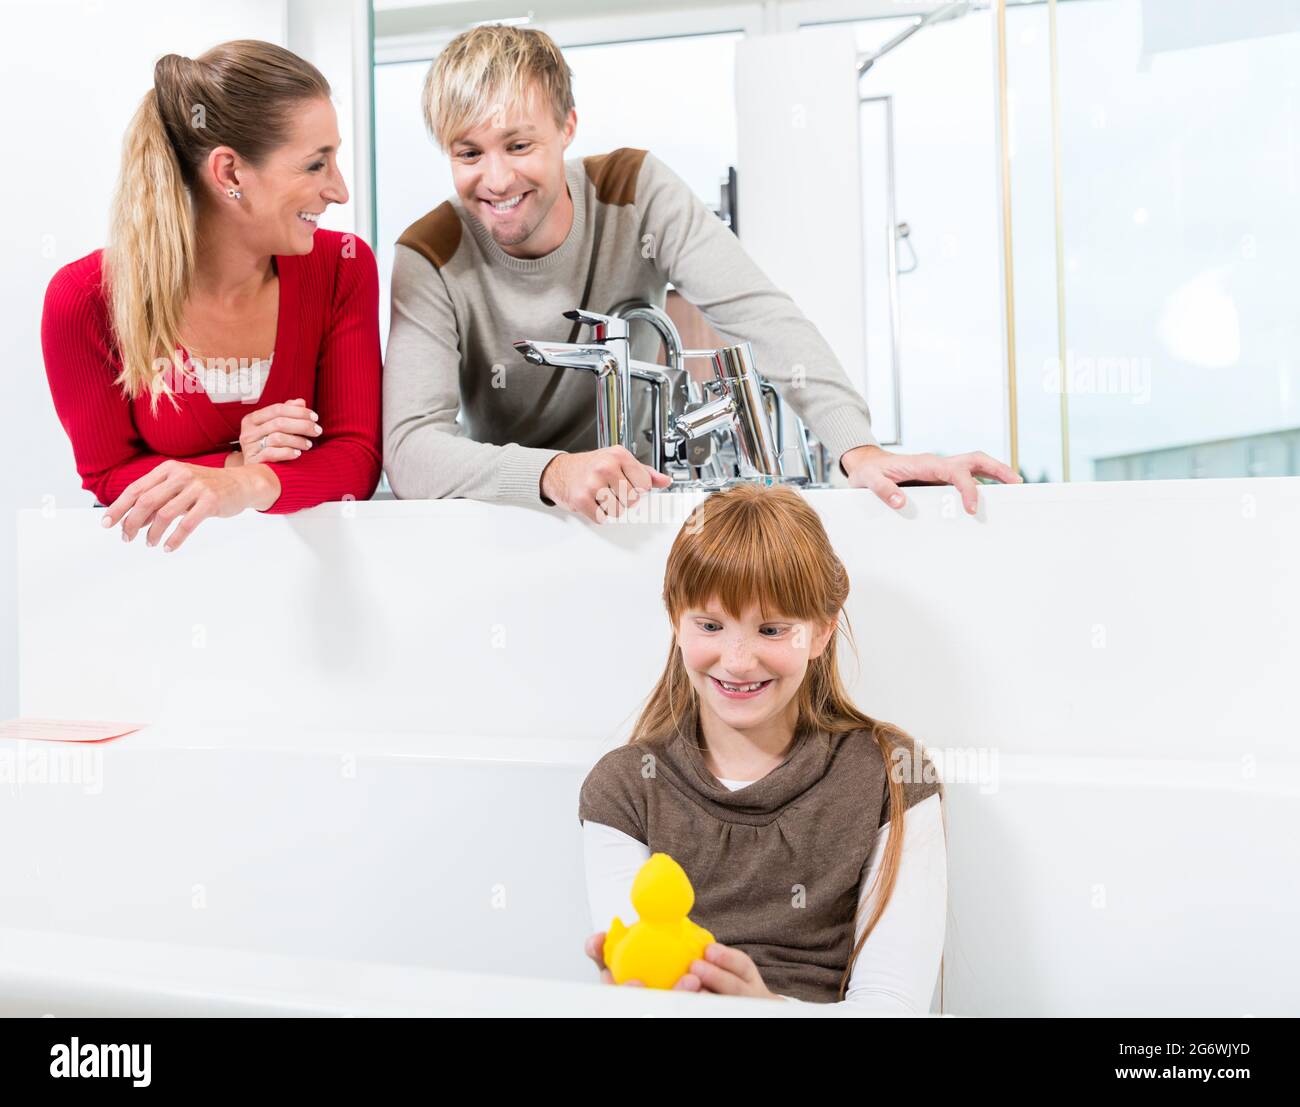 Cute and funny girl looking at her happy parents, while sitting in a white bathtub in the showroom of a sanitary ware shop with high-quality fixtures Stock Photo